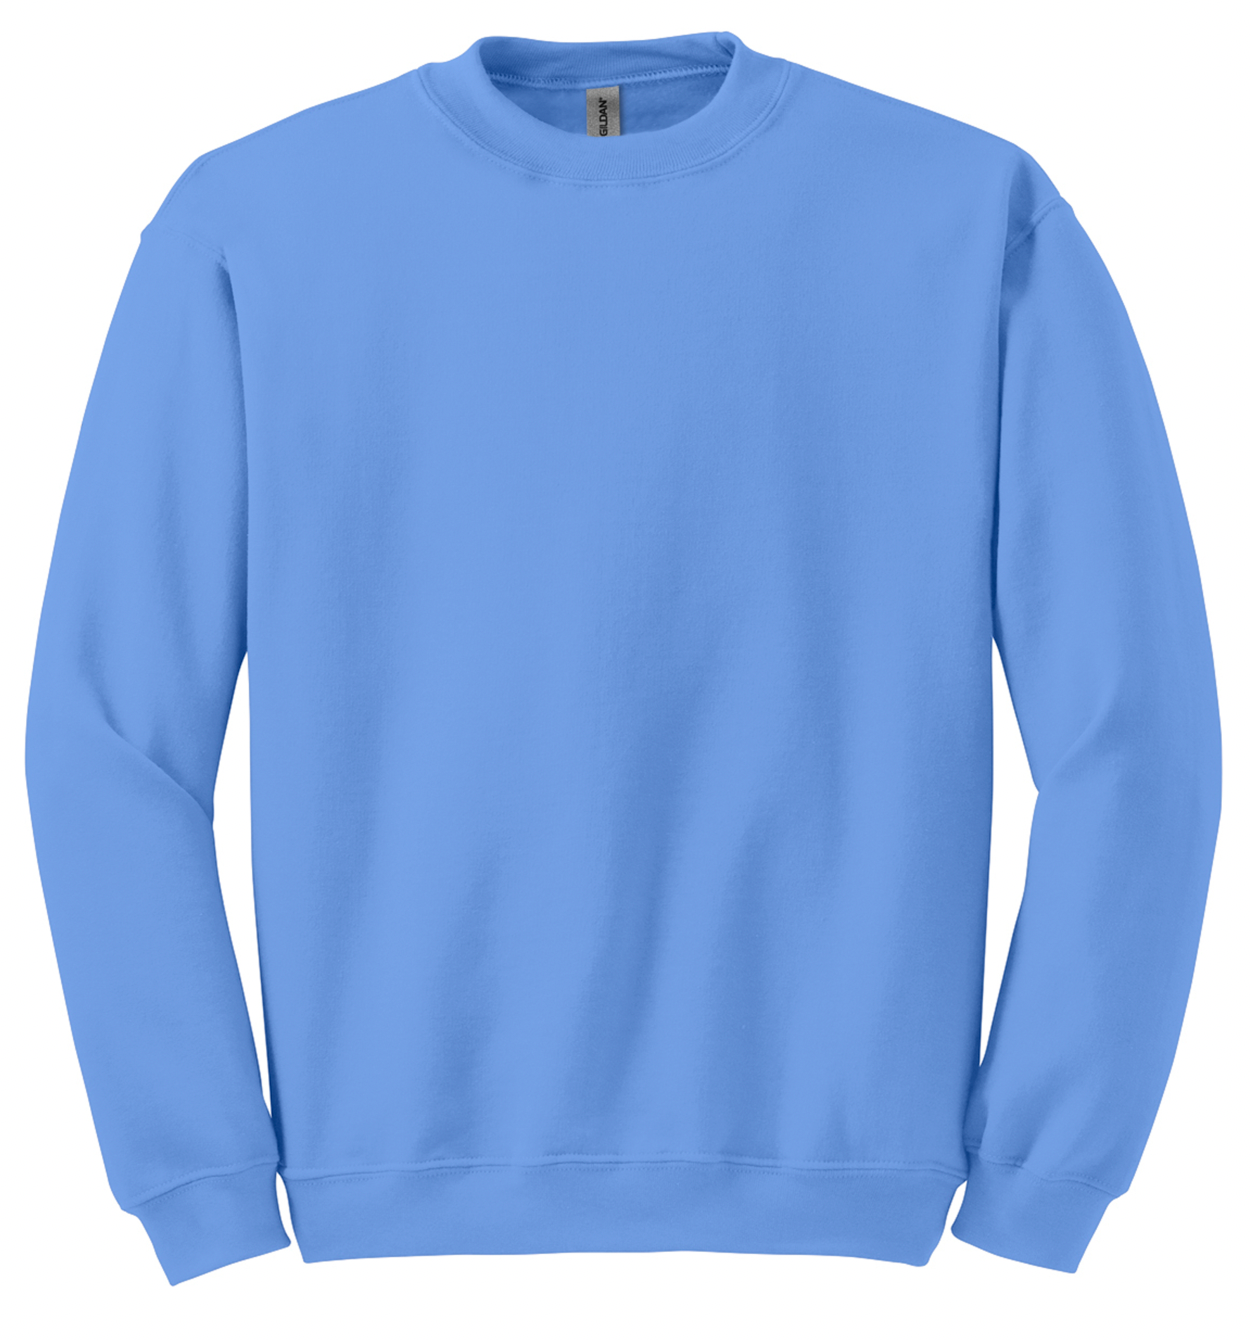 Left Chest Logo - Mary Hill - Integrated Services Crewneck Sweatshirt